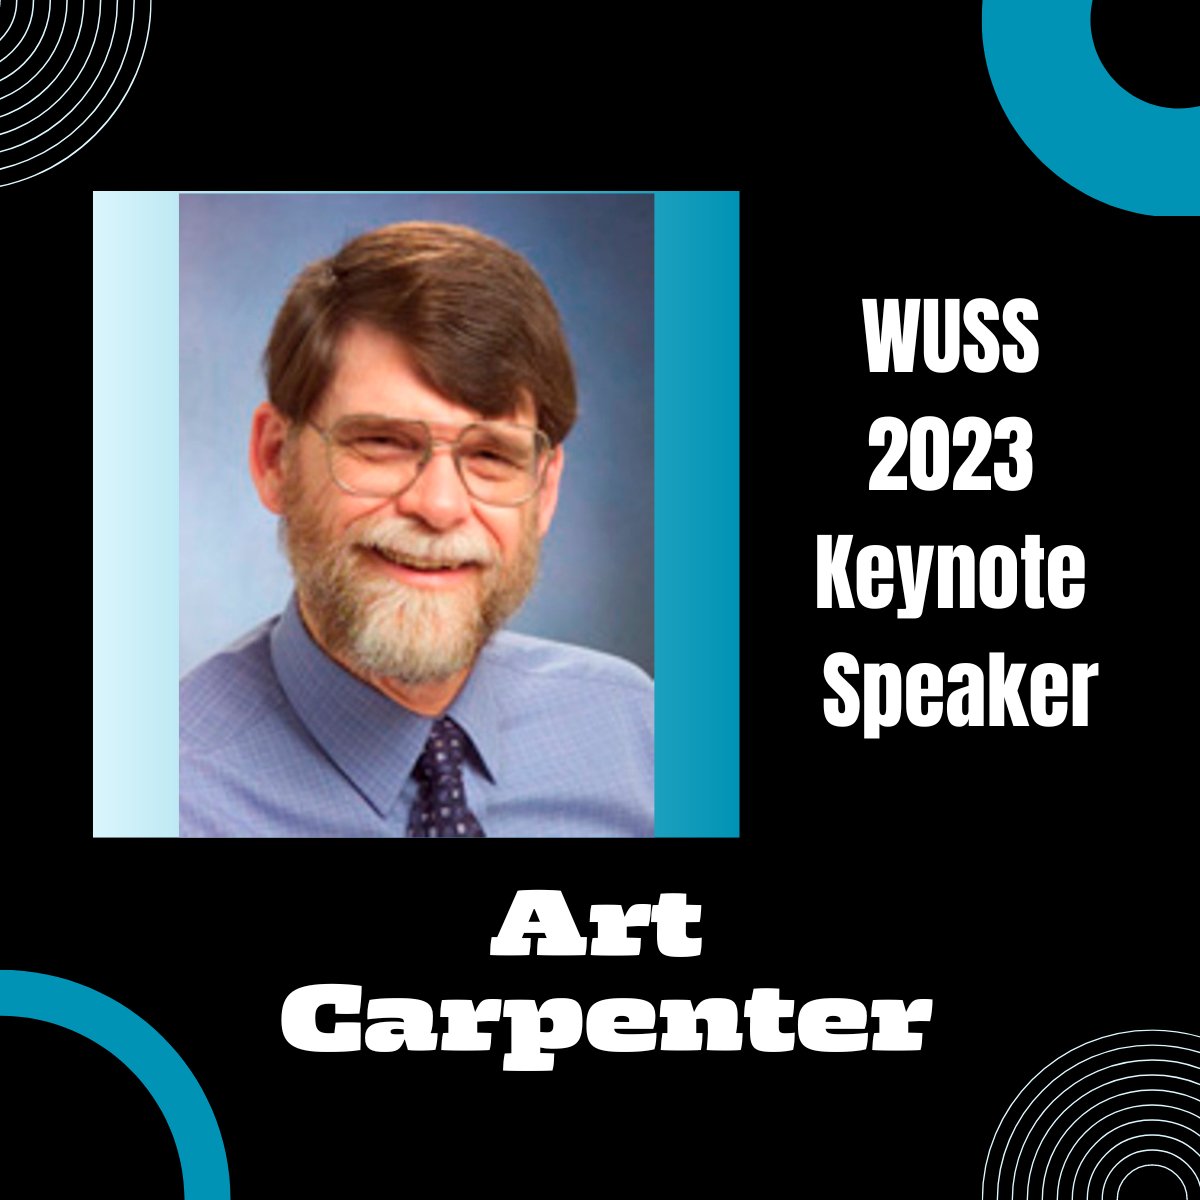 Art Carpenter is coming to San Diego. Are you? Come see the world famous author of Carpenter's Complete Guide to the SAS Macro Language in a very special appearance this fall. Only at WUSS 2023. Register today at wuss.org. #wuss2023 #sas #r #python